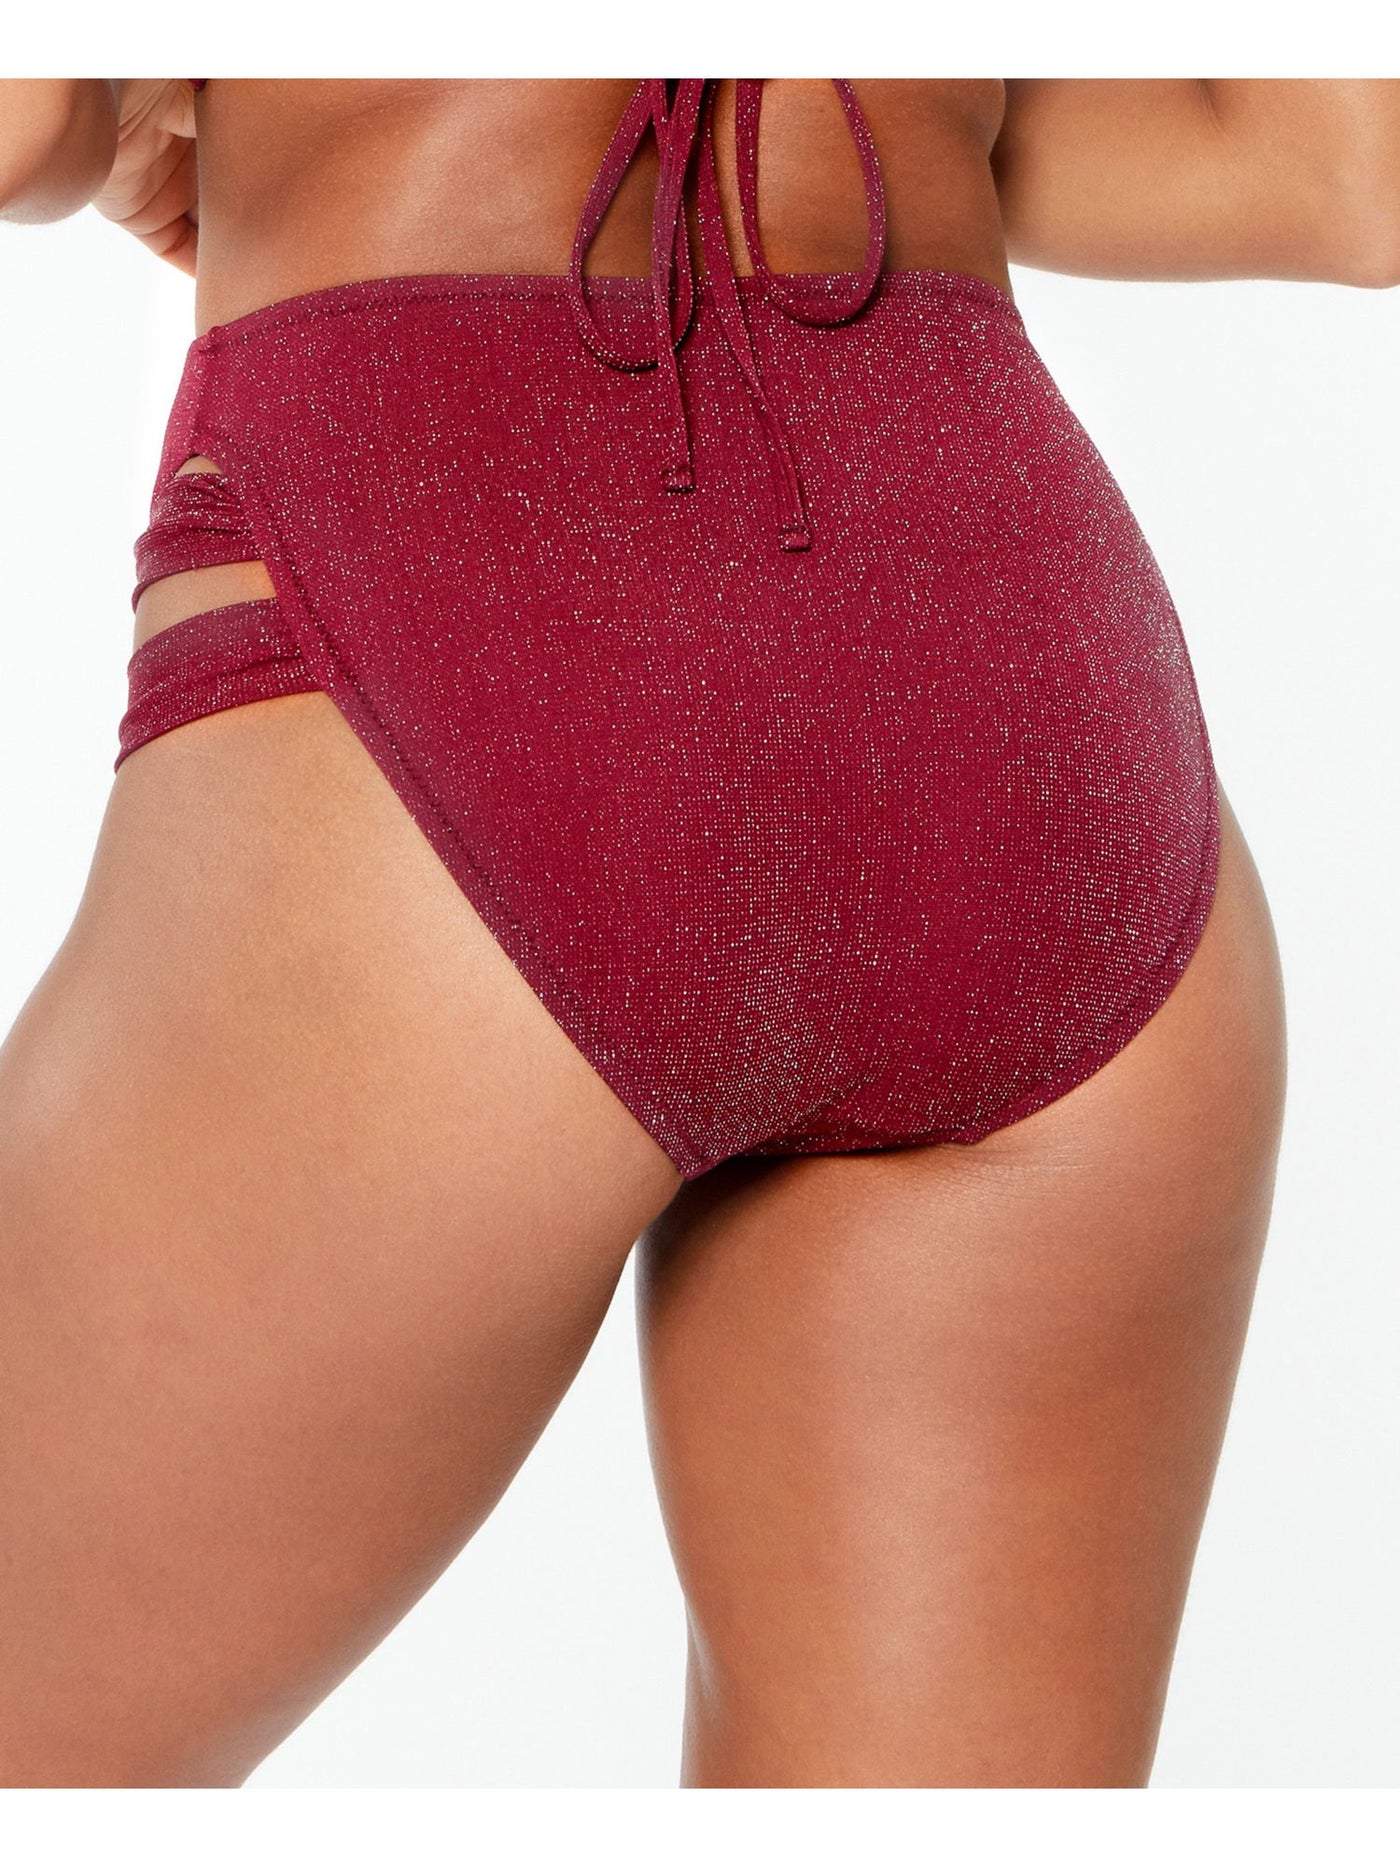 BAR III Women's Burgundy Stretch Lined Full Coverage Strappy Shimmer High Waisted Swimsuit Bottom XS